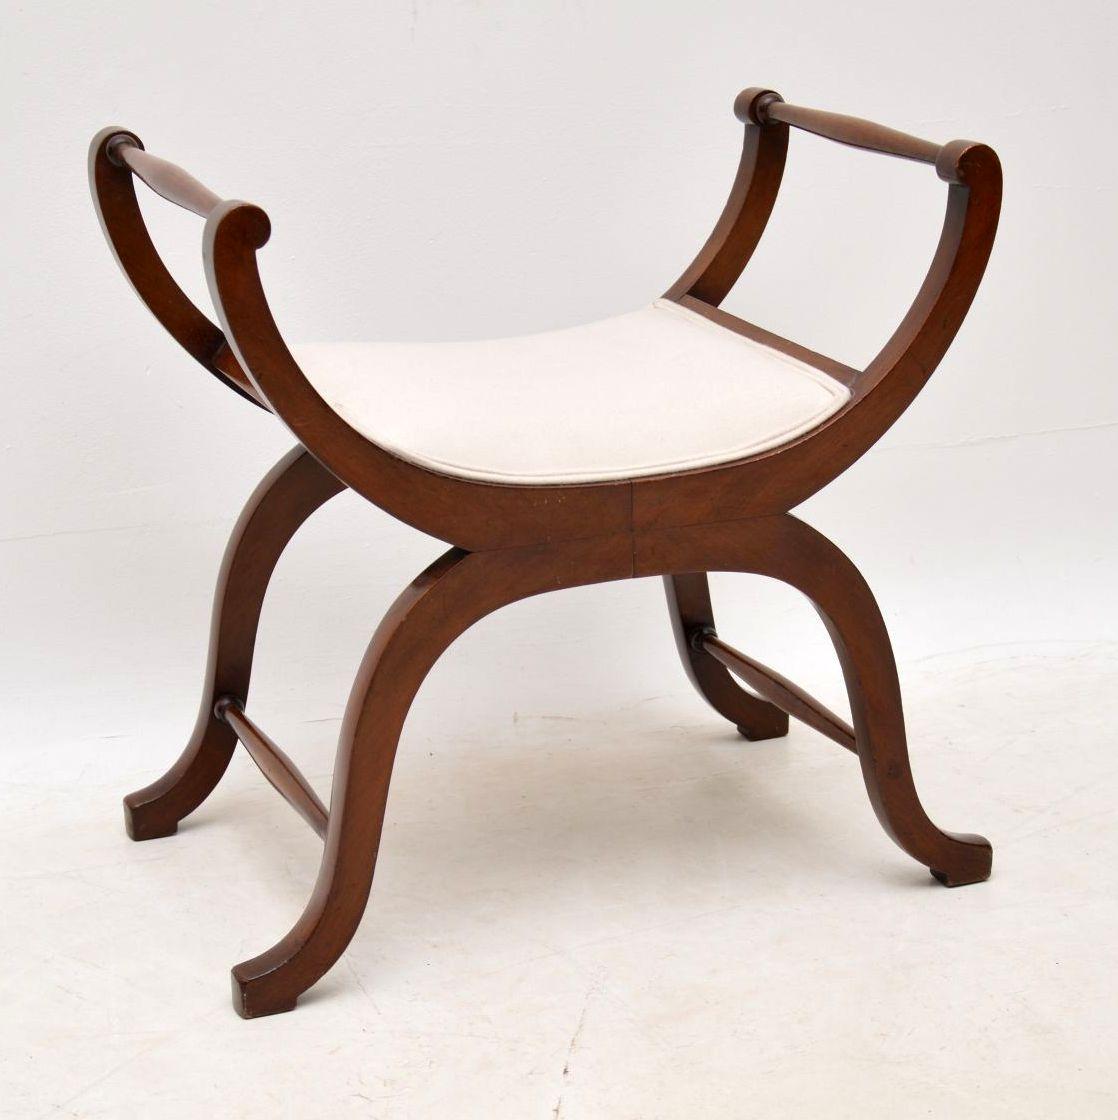 Antique Edwardian mahogany gondola stool in good original condition and with a lovely shape. This stool would be ideal for use with a dressing table. It has turned rails at the top & matching turned stretchers between the legs to give more